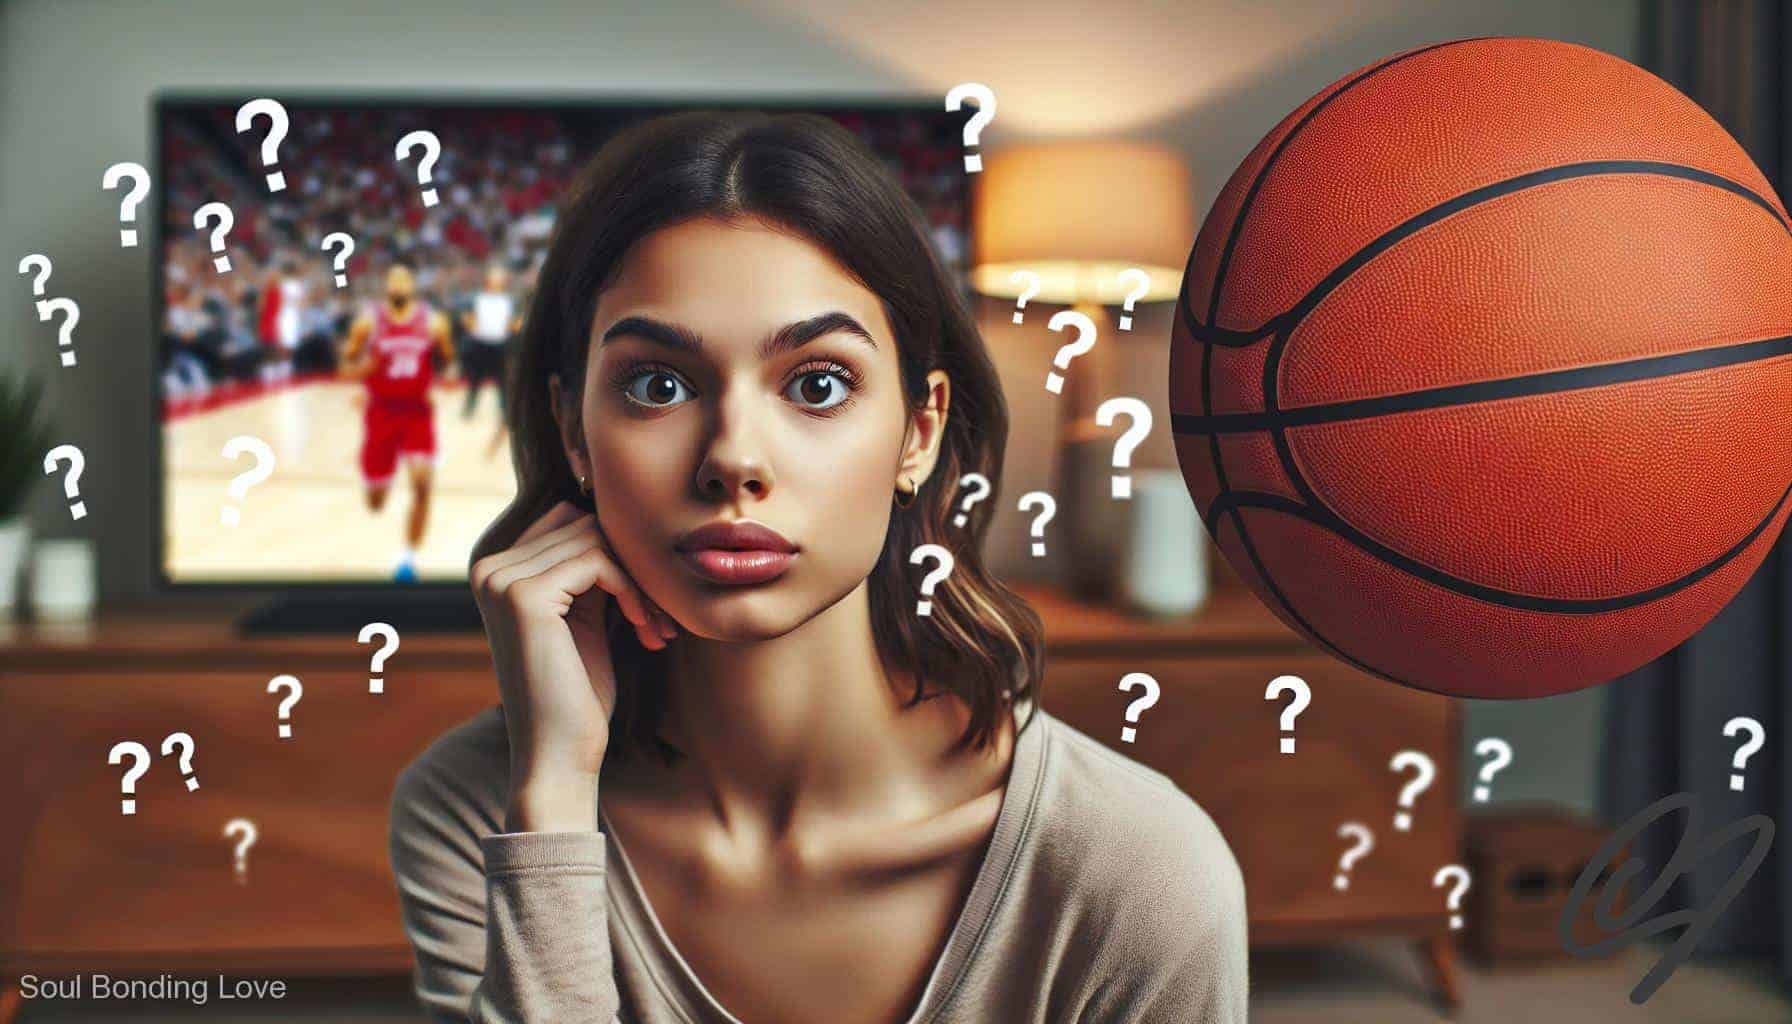 my girlfriend said is there basketball on